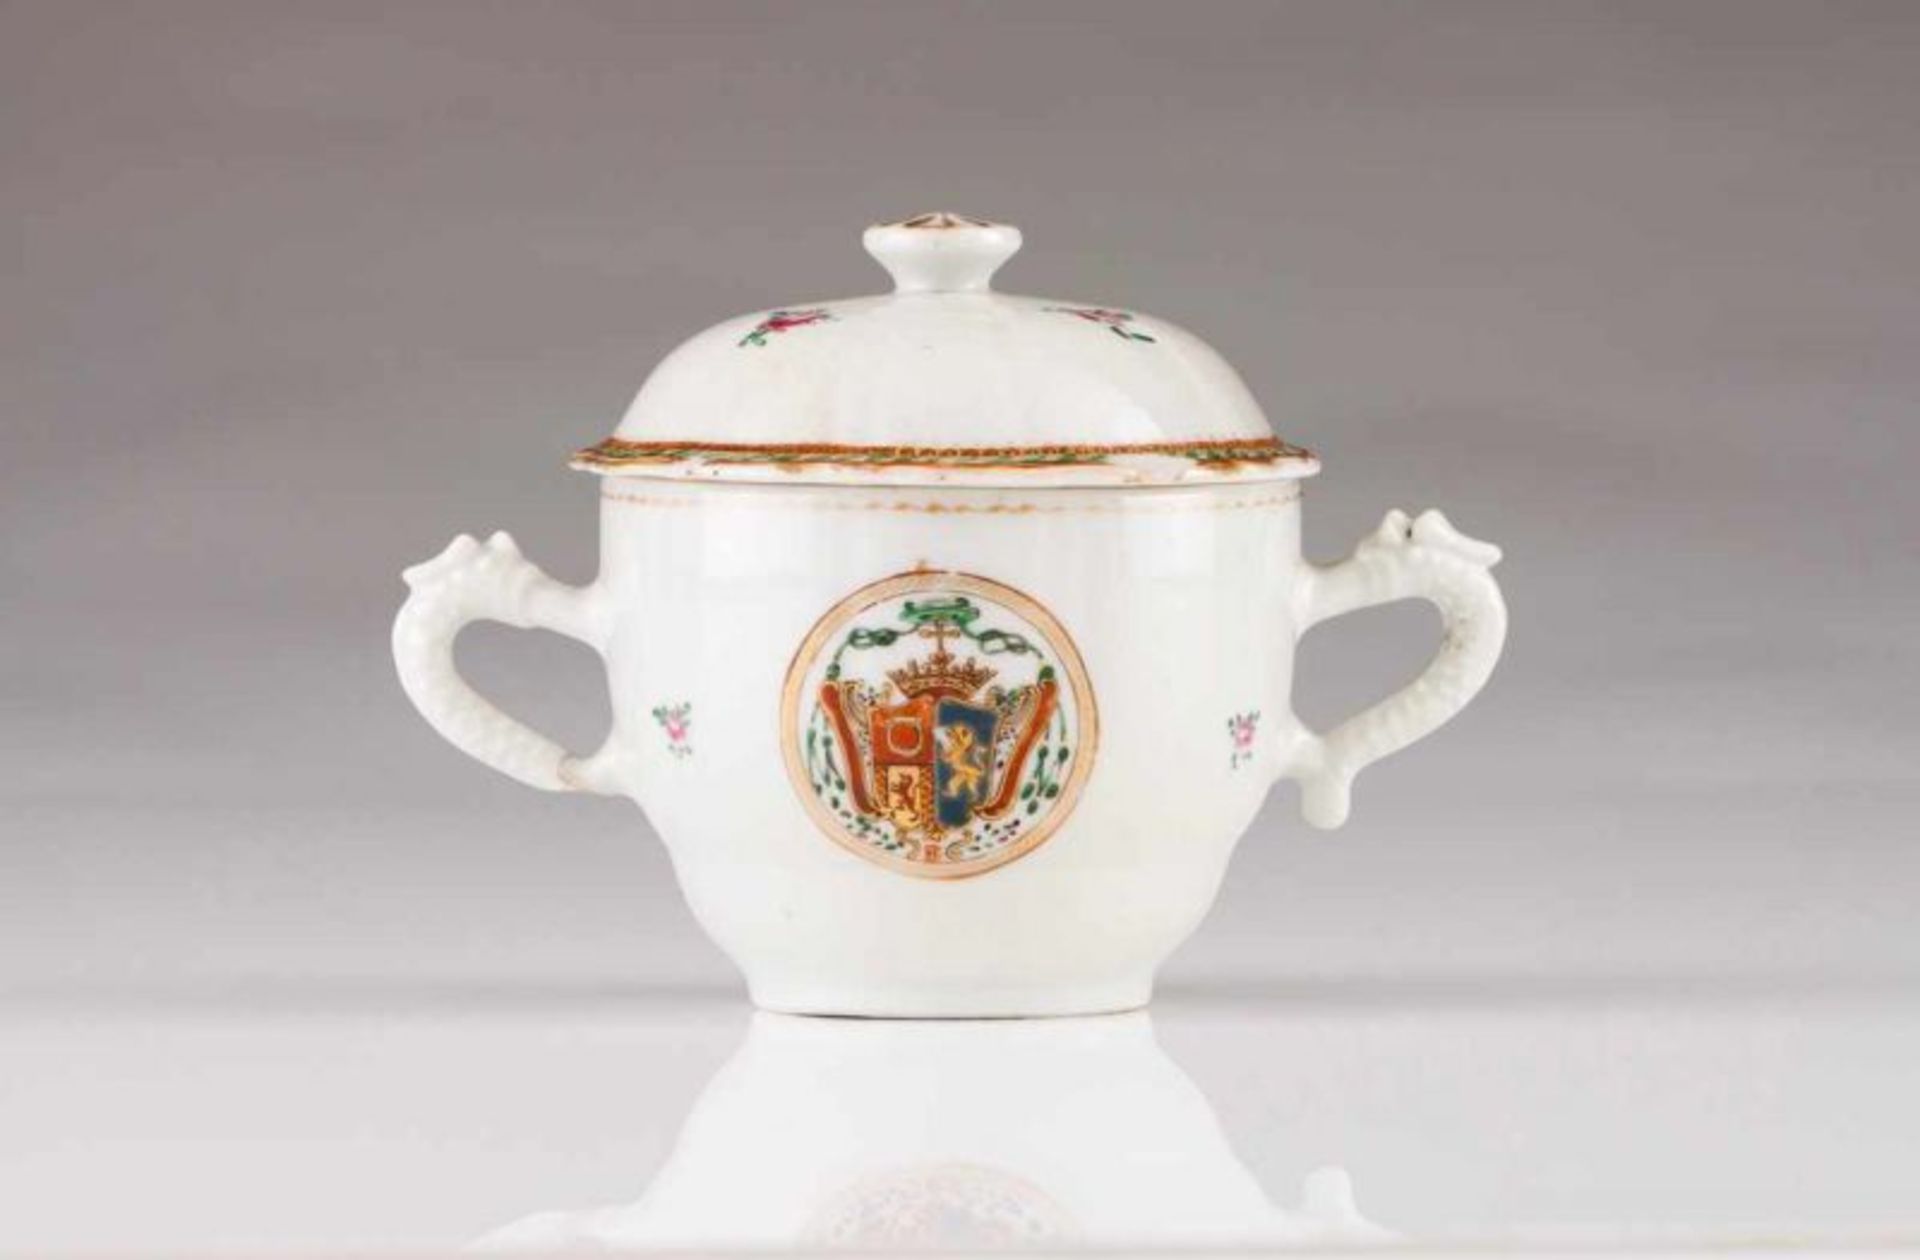 A sugar bowl with scalloped cover Chinese export porcelain Polychrome and gilt Famille Rose